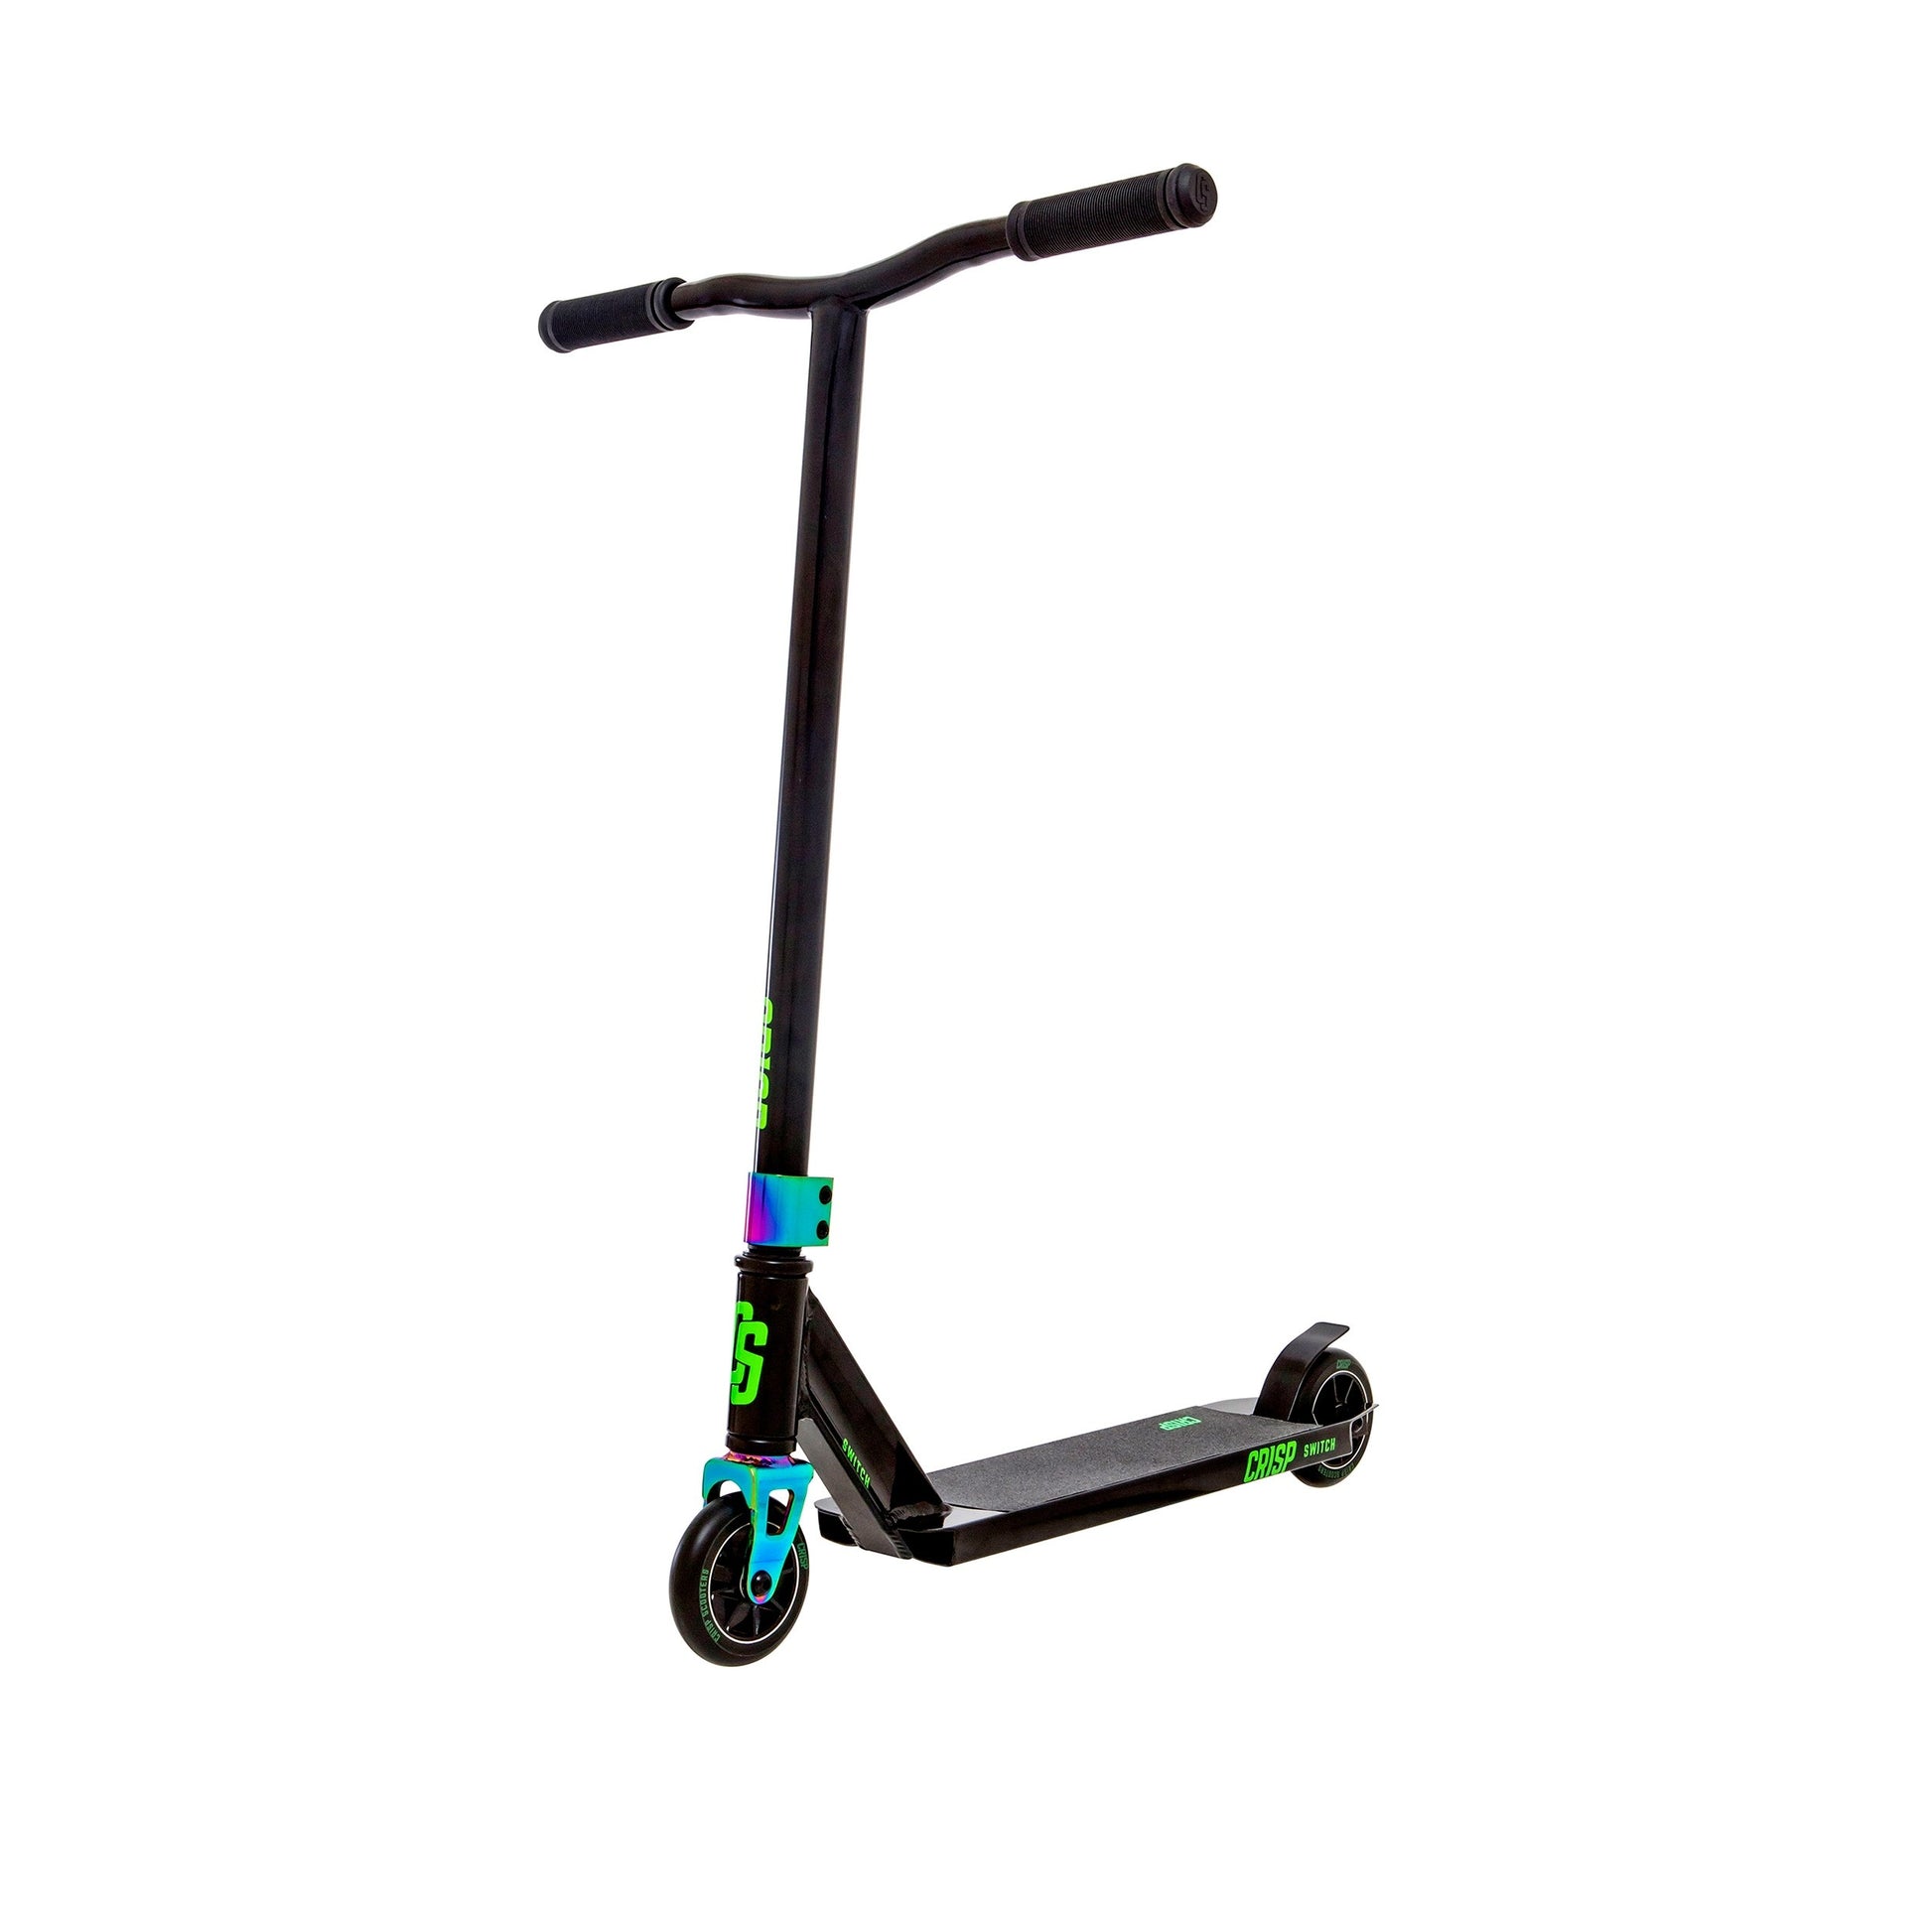 Crisp Scooters Switch Gloss Black - Prime Delux Store